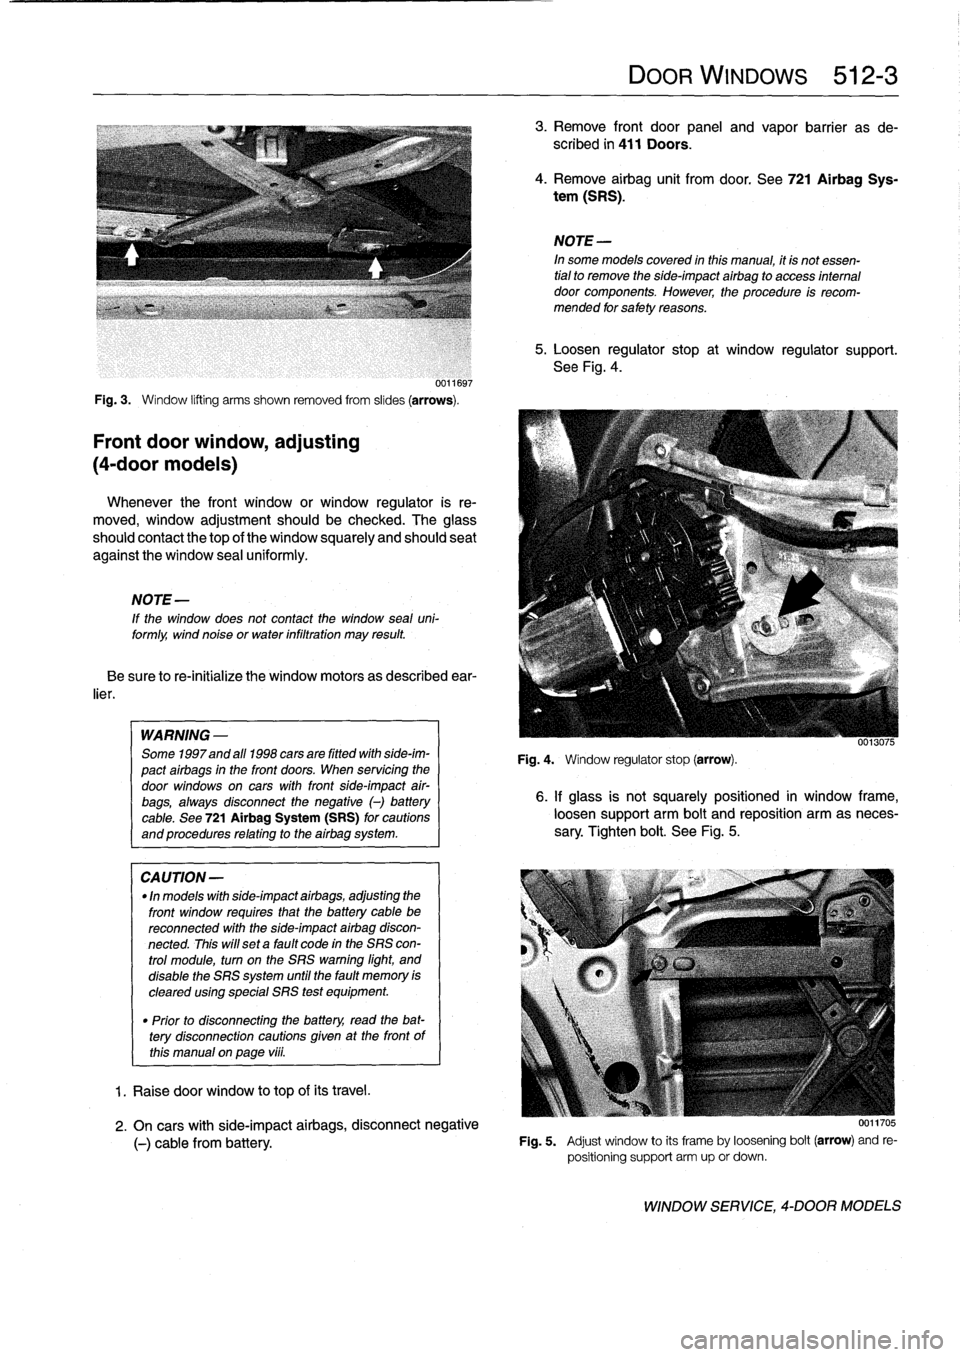 BMW 323i 1993 E36 Workshop Manual 
0011697

Fig
.
3
.

	

Window
lifting
arms
shown
removed
from
slides
(arrows)
.

Front
door
window,
adjusting

(4-door
models)

Whenever
the
front
window
or
window
regulator
is
re-

moved,
window
adj